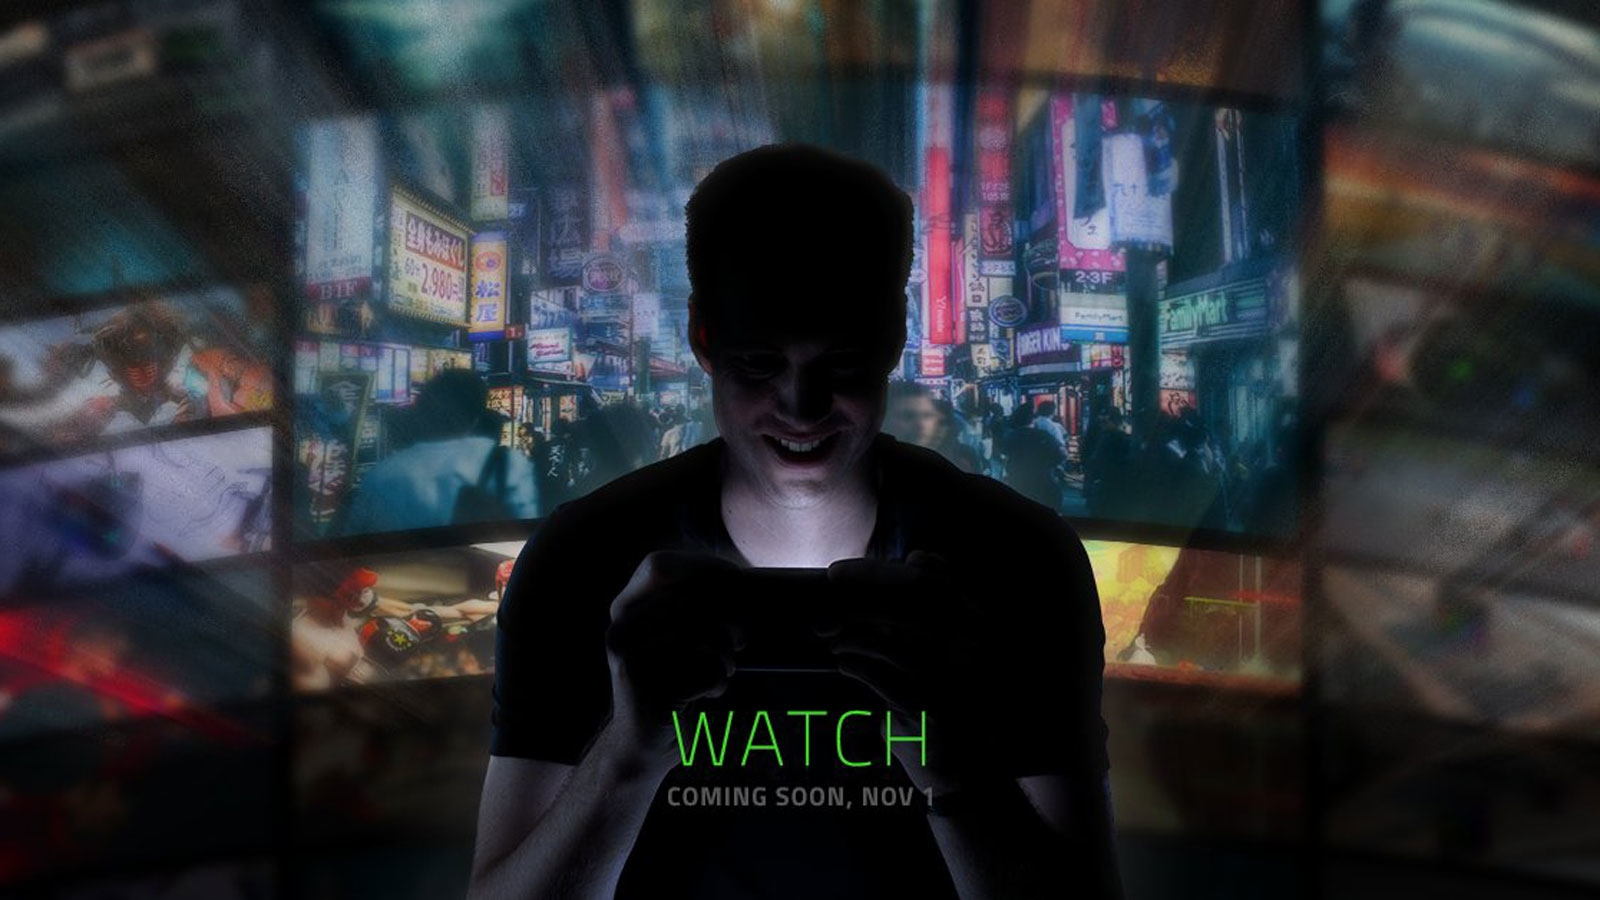 Razer's biggest unveiling arrives next month, likely its first smartphone